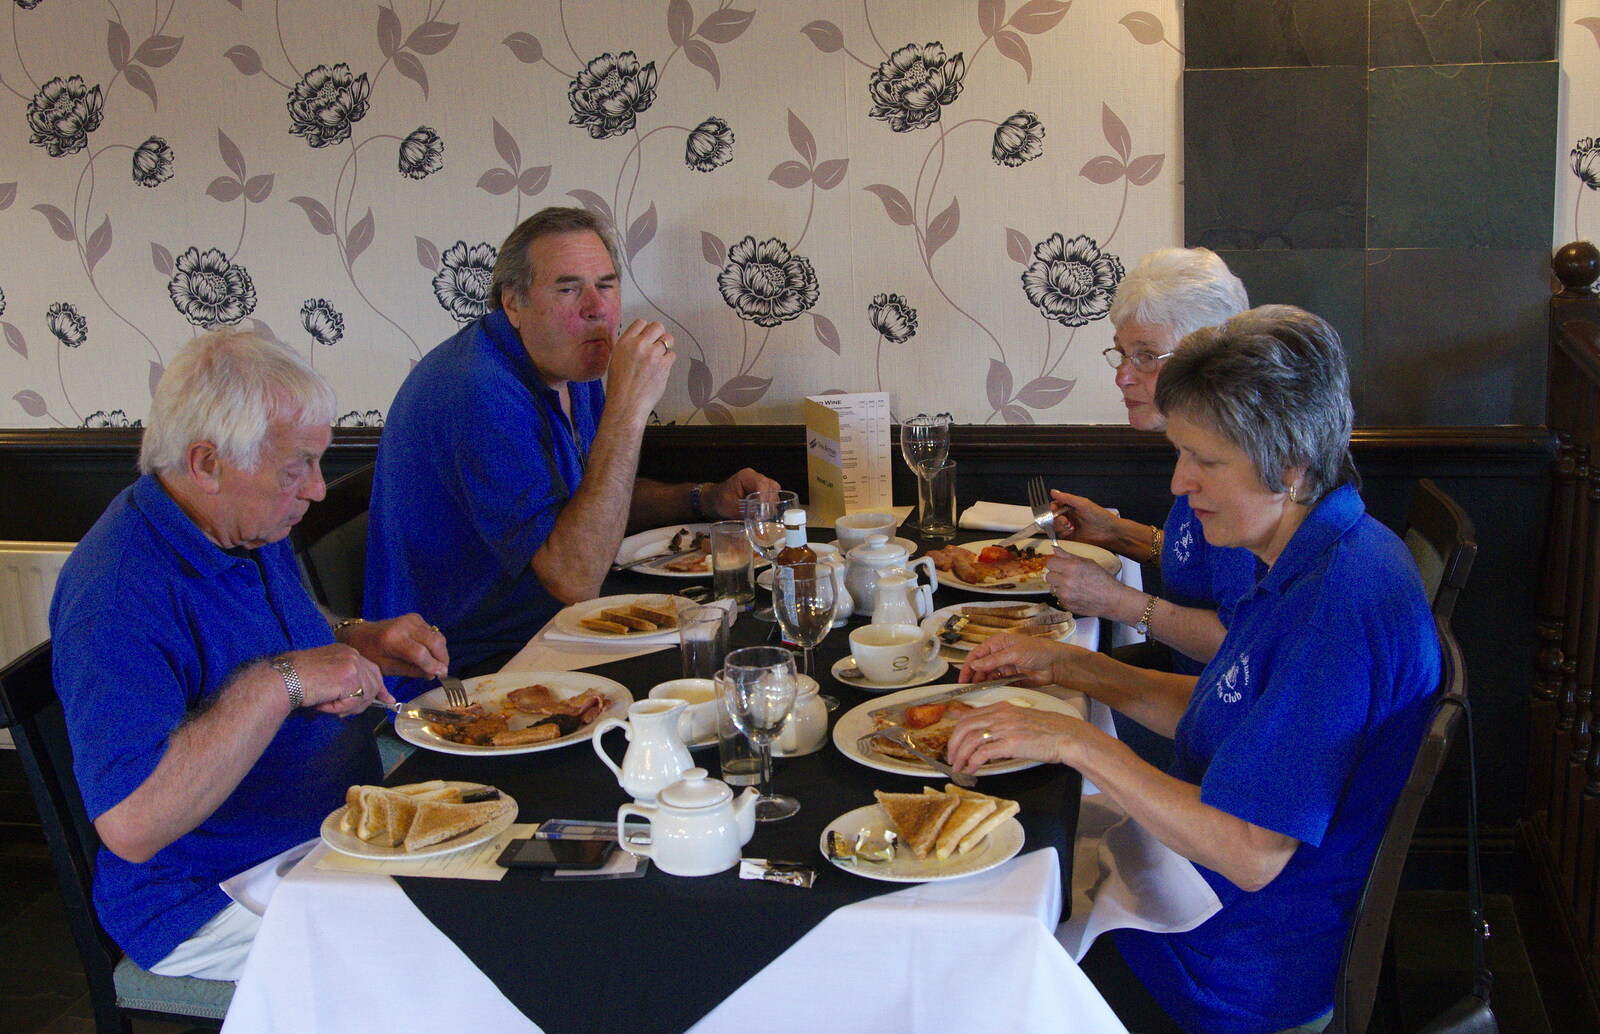 The Sagas do breakfast from A Return to Bedford: the BSCC Annual Weekend Away, Shefford, Bedfordshire - 10th May 2014